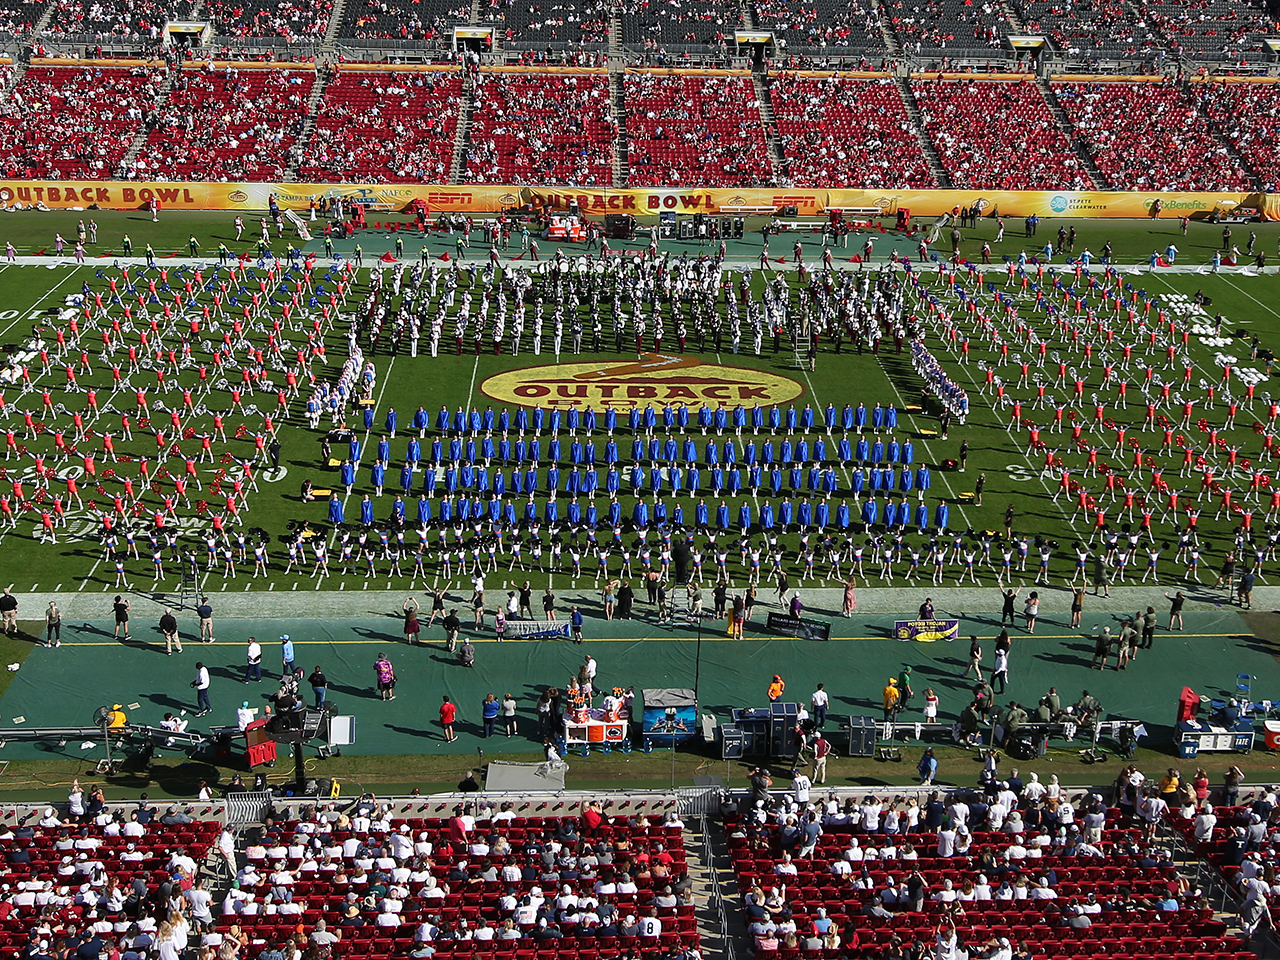 More than 2,000 performers are a part of the Outback Bowl Halftime Show